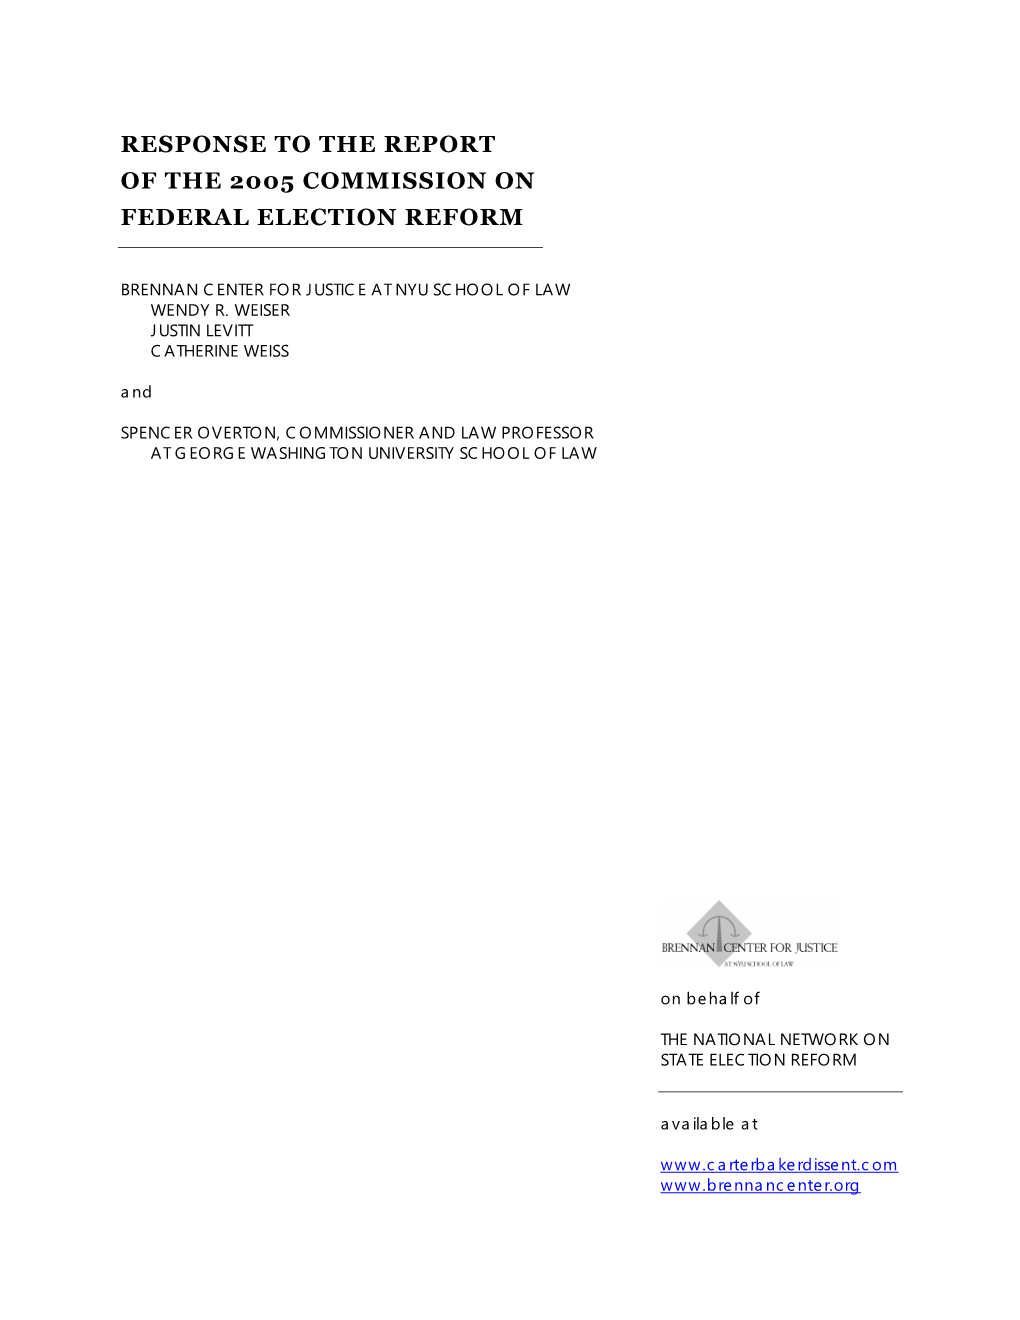 Response to the Report of the 2005 Commission on Federal Election Reform